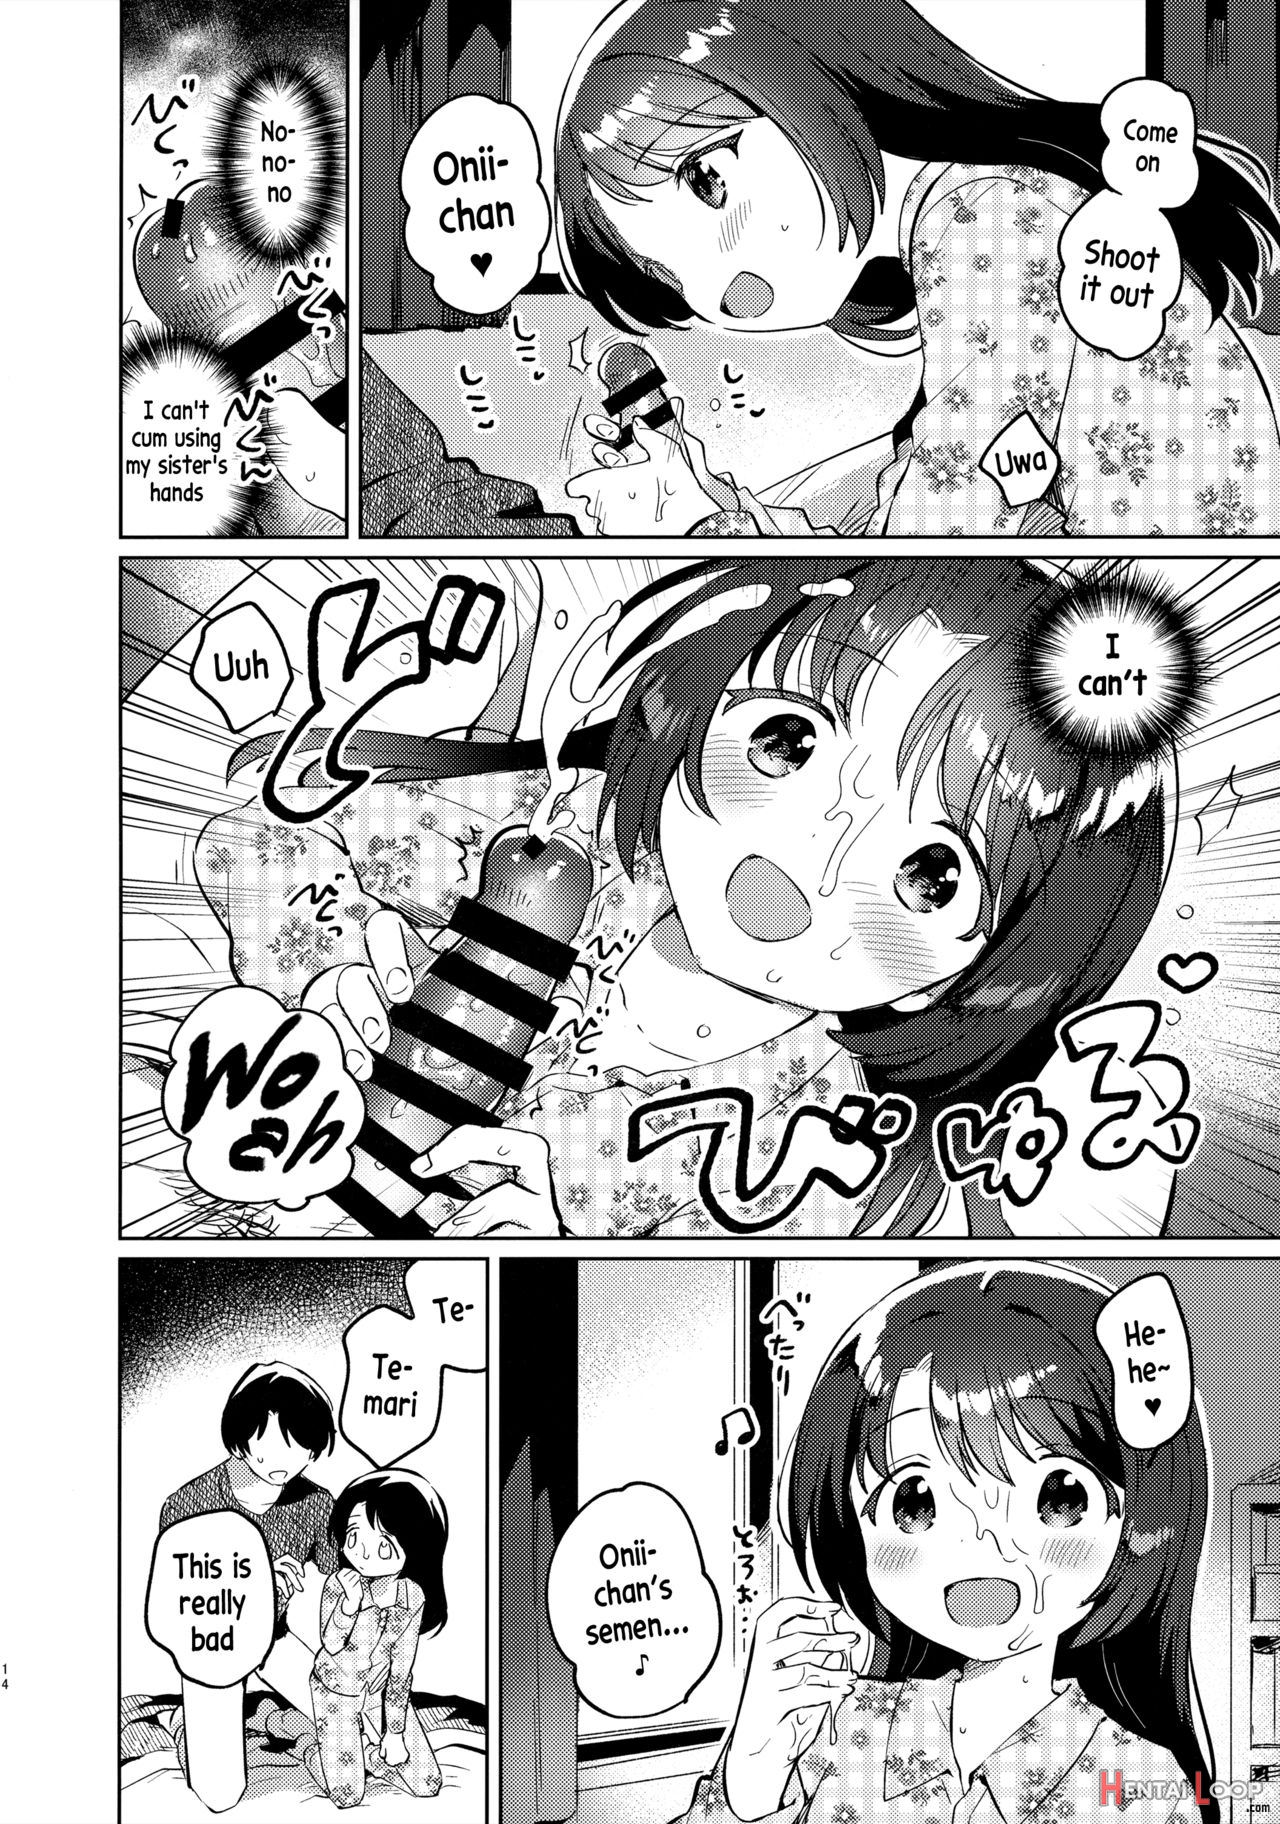 Imouto To Lockdown page 13